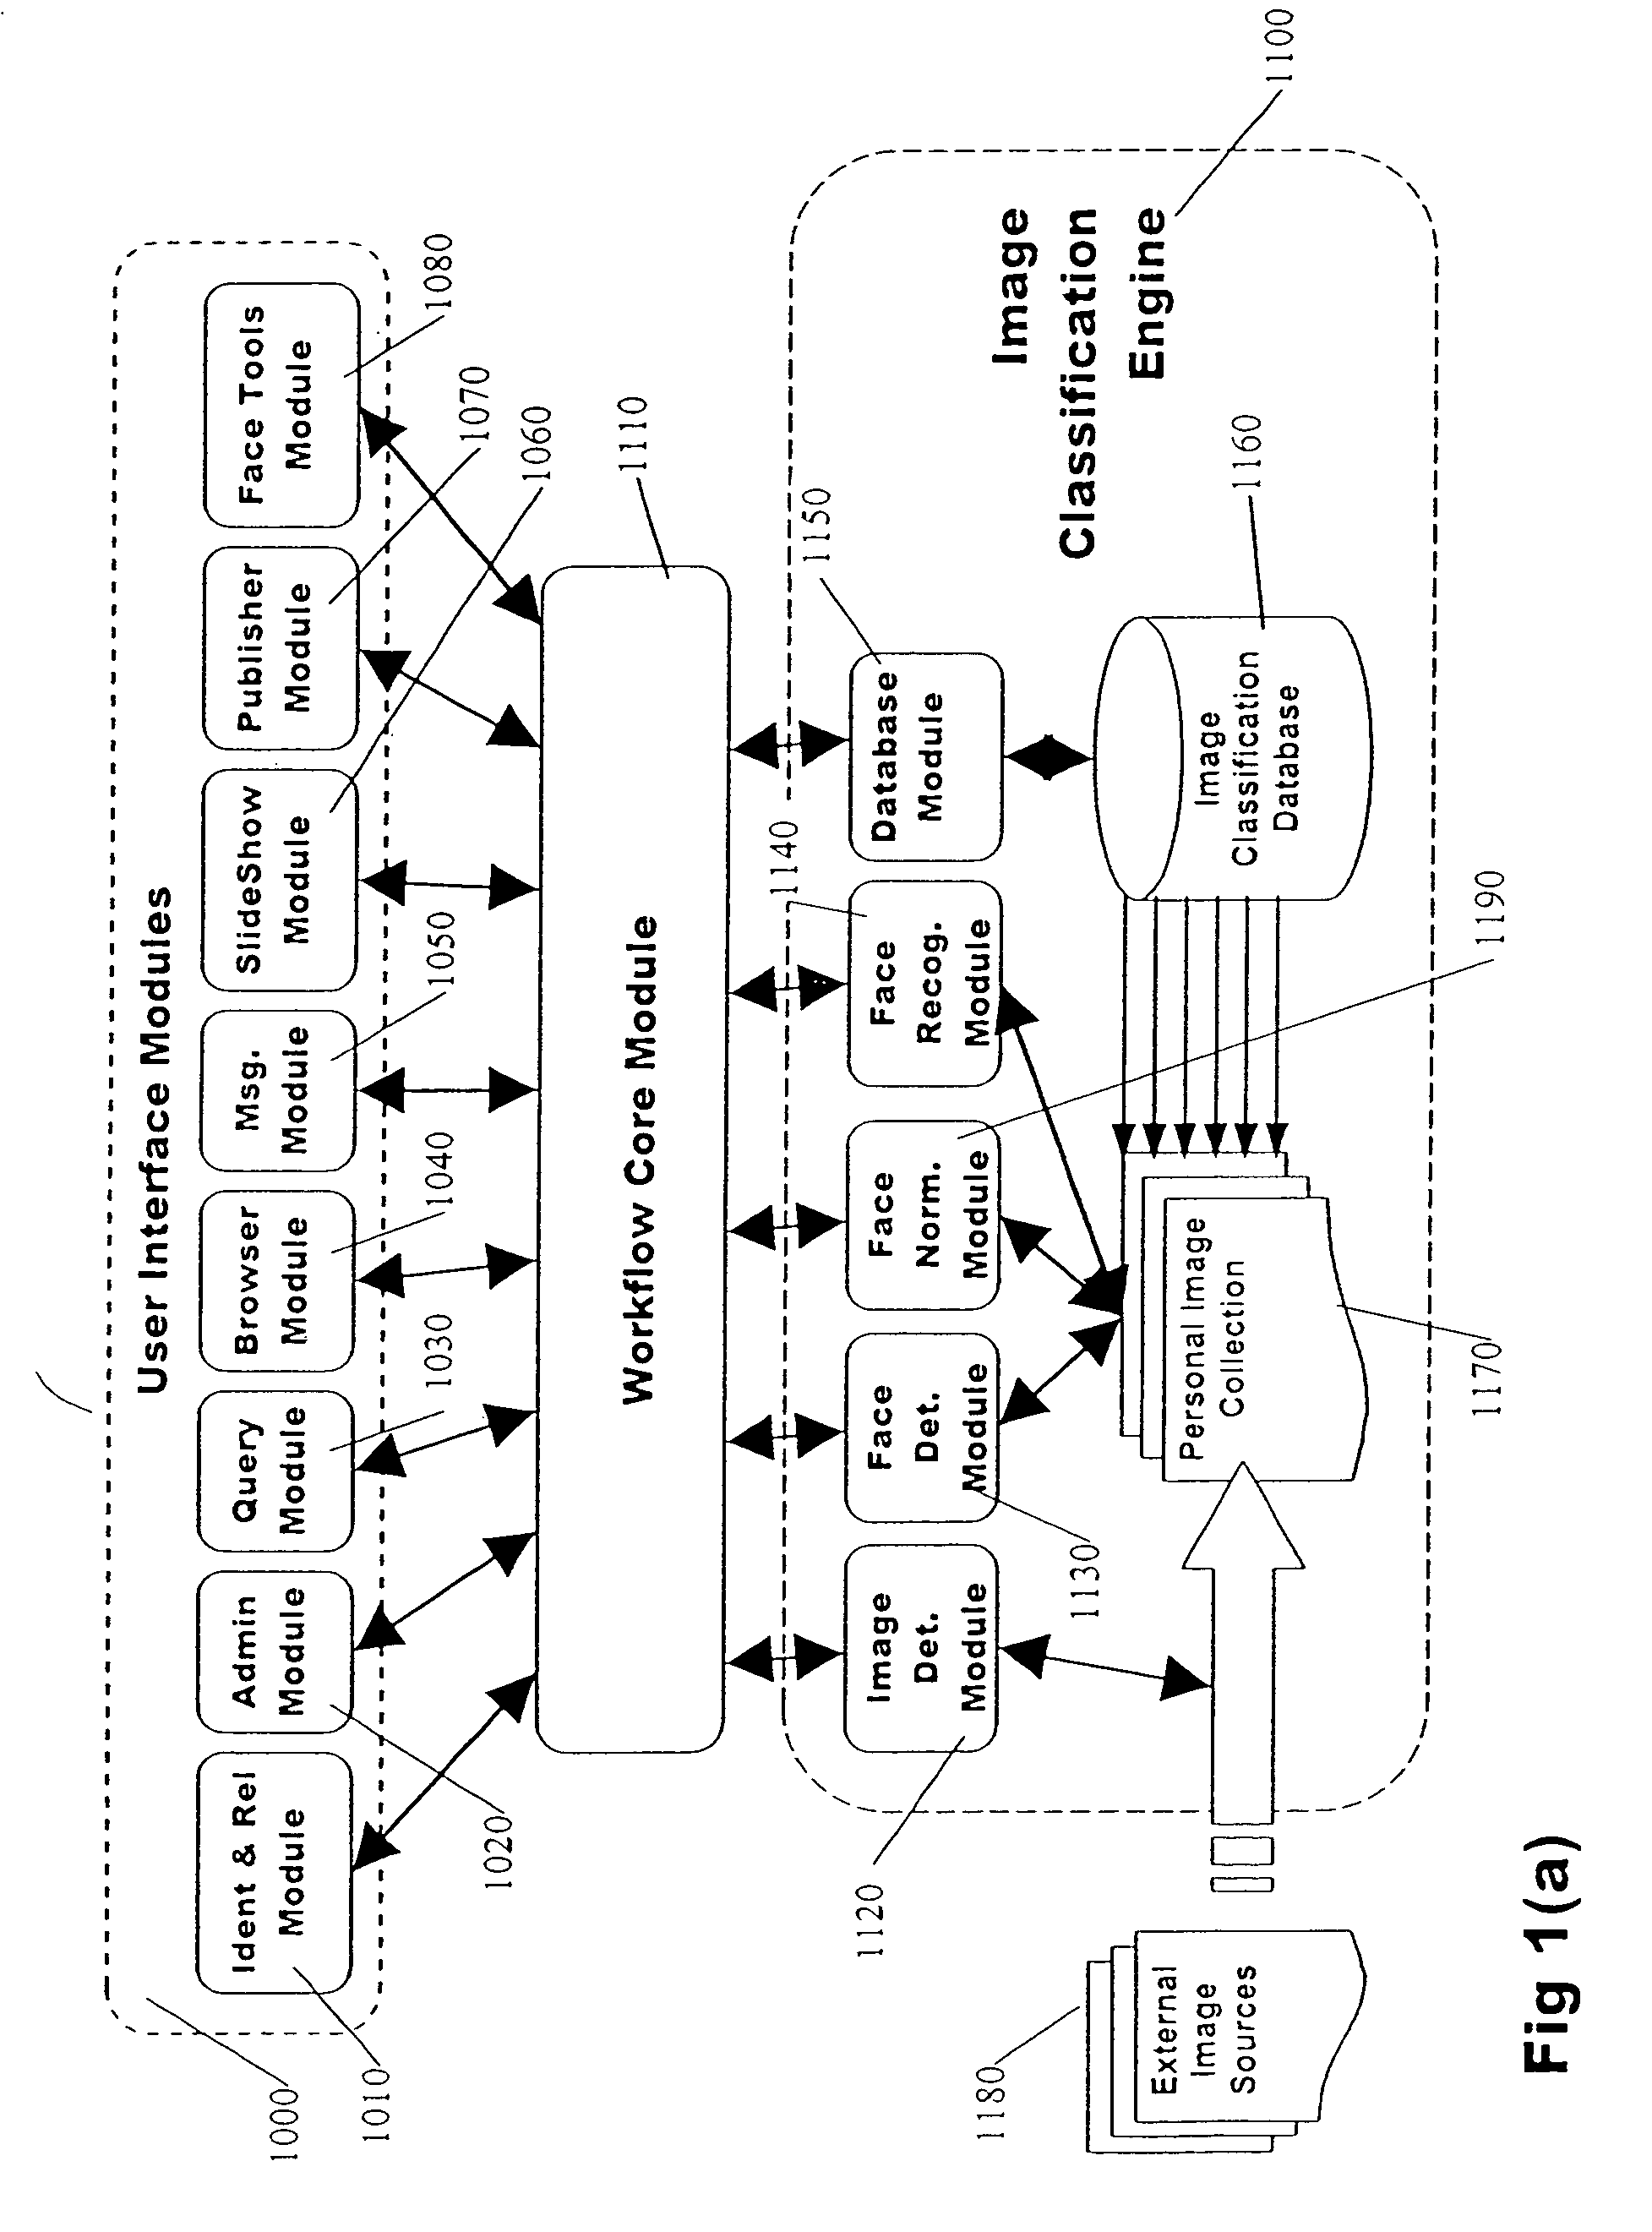 Classification system for consumer digital images using workflow, face detection, normalization, and face recognition